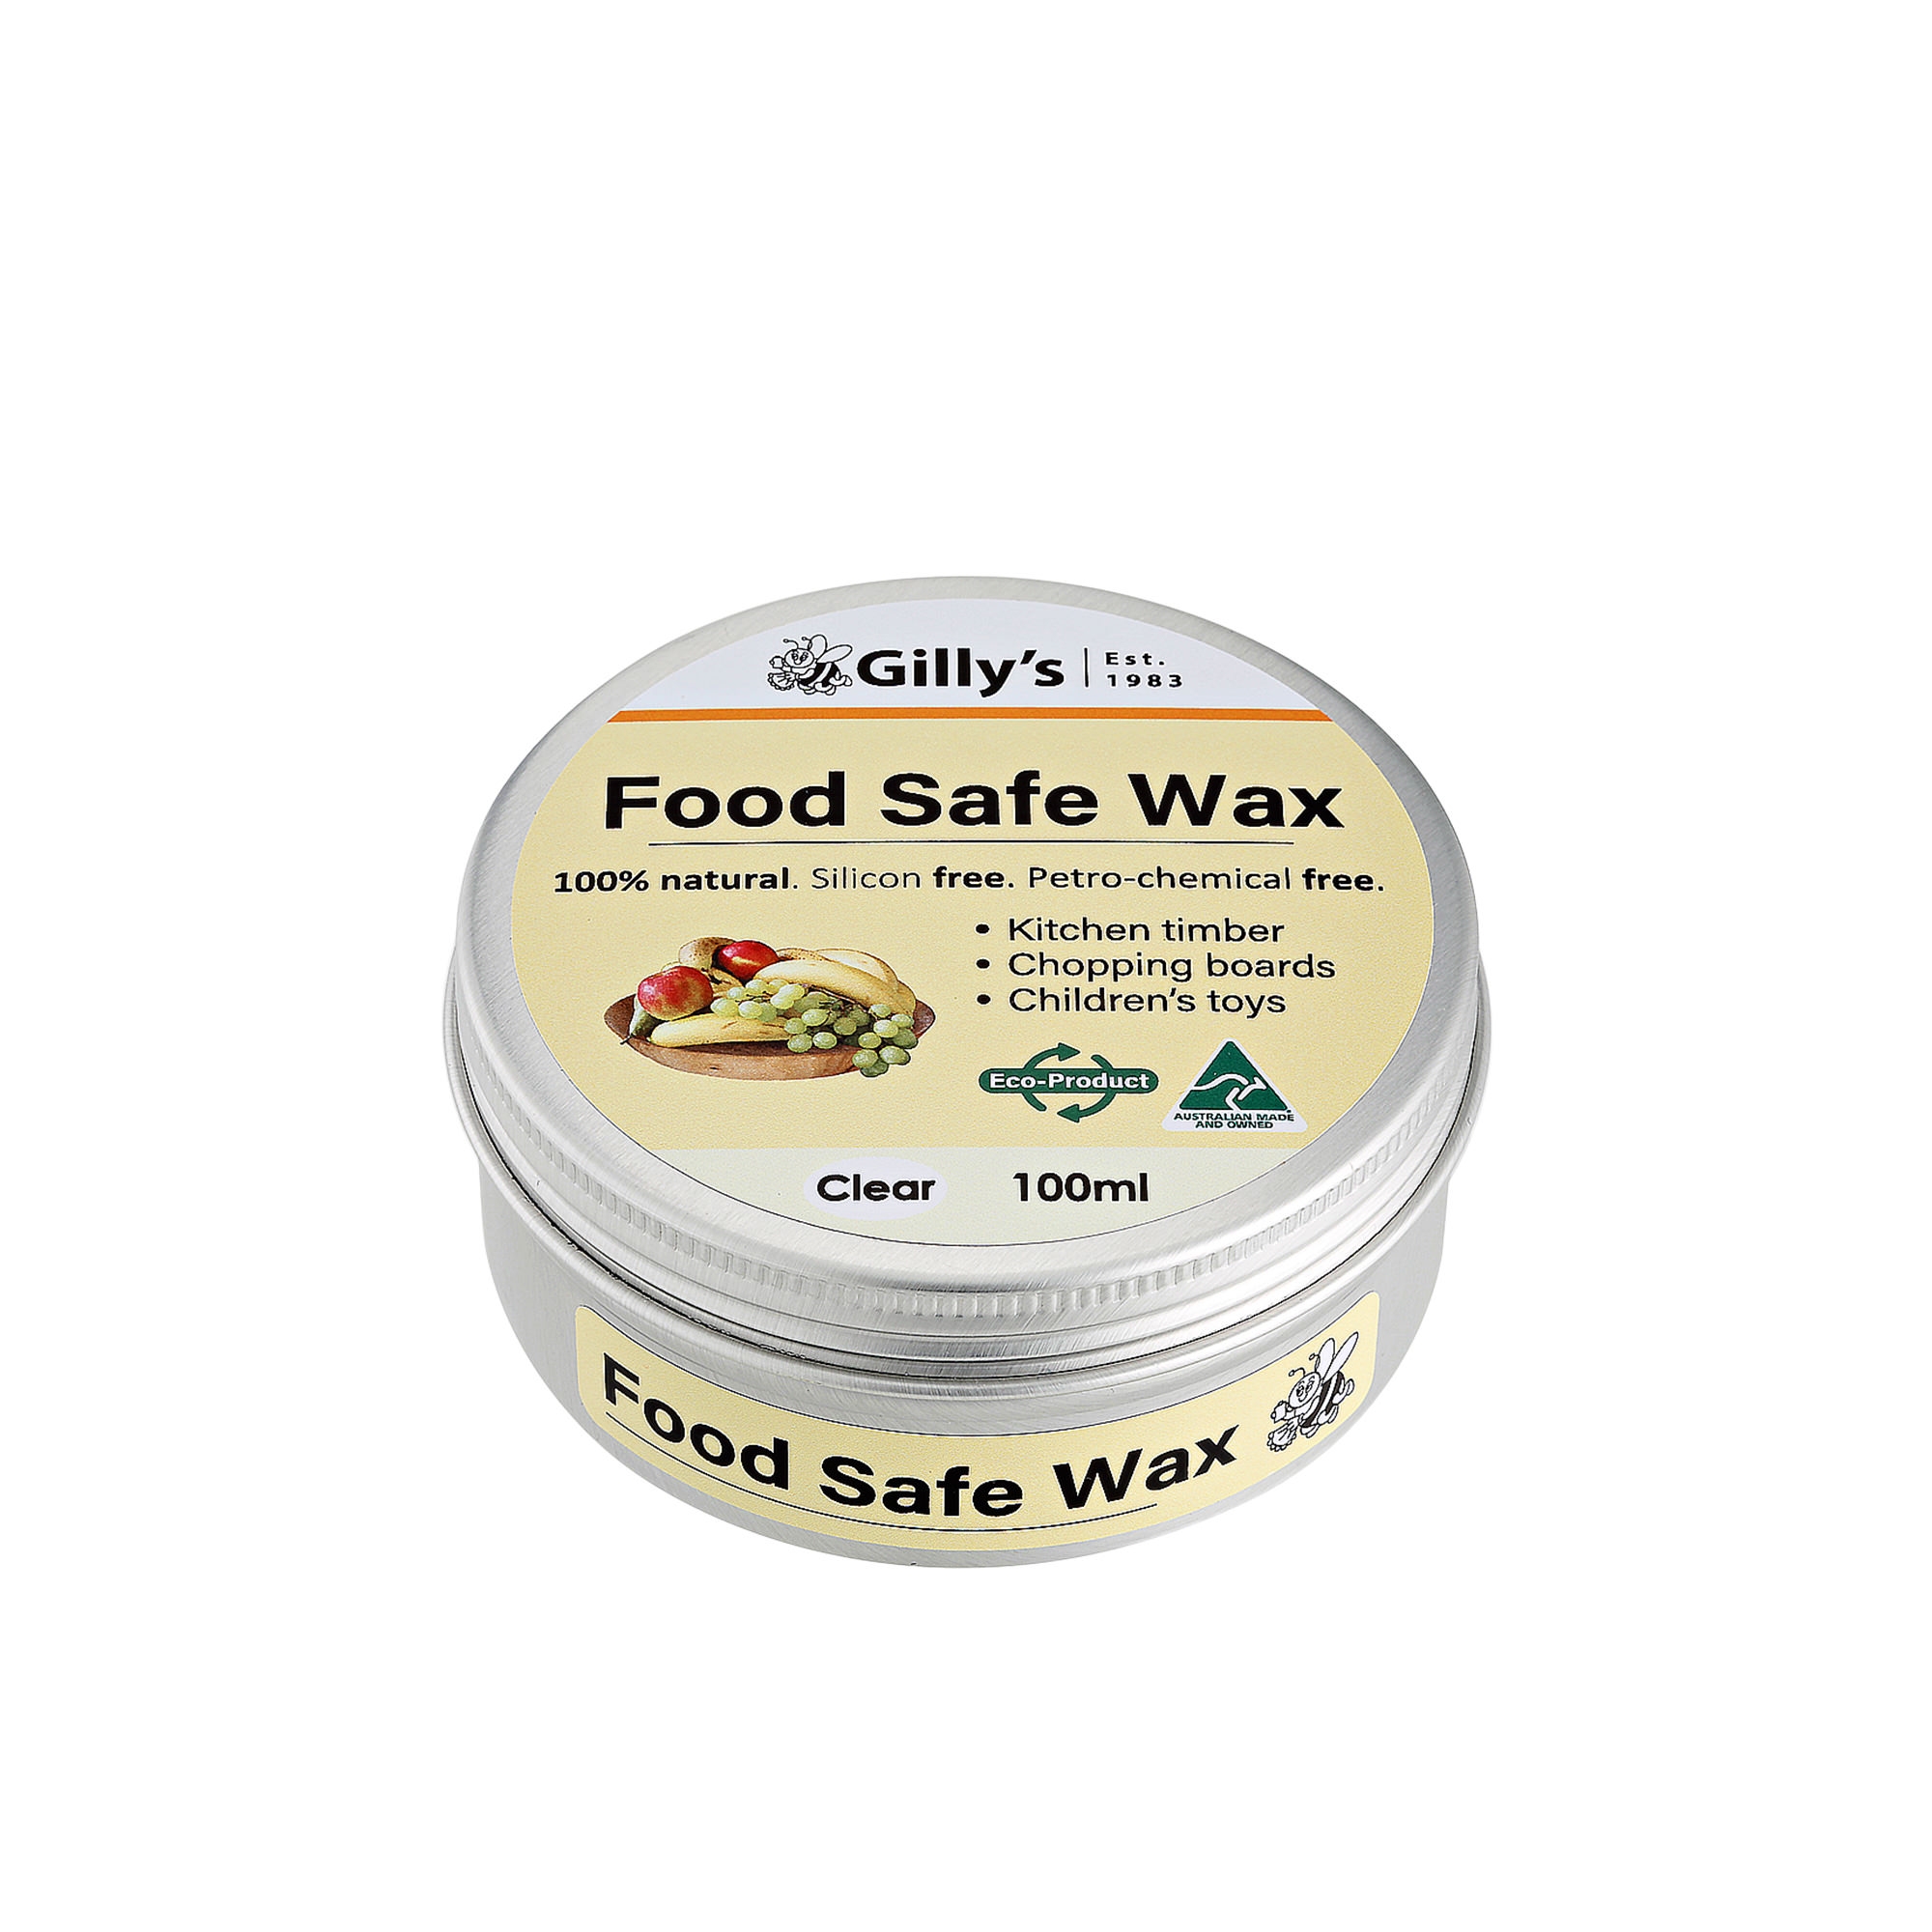 Gilly's Food Safe Wax 100ml Image 1